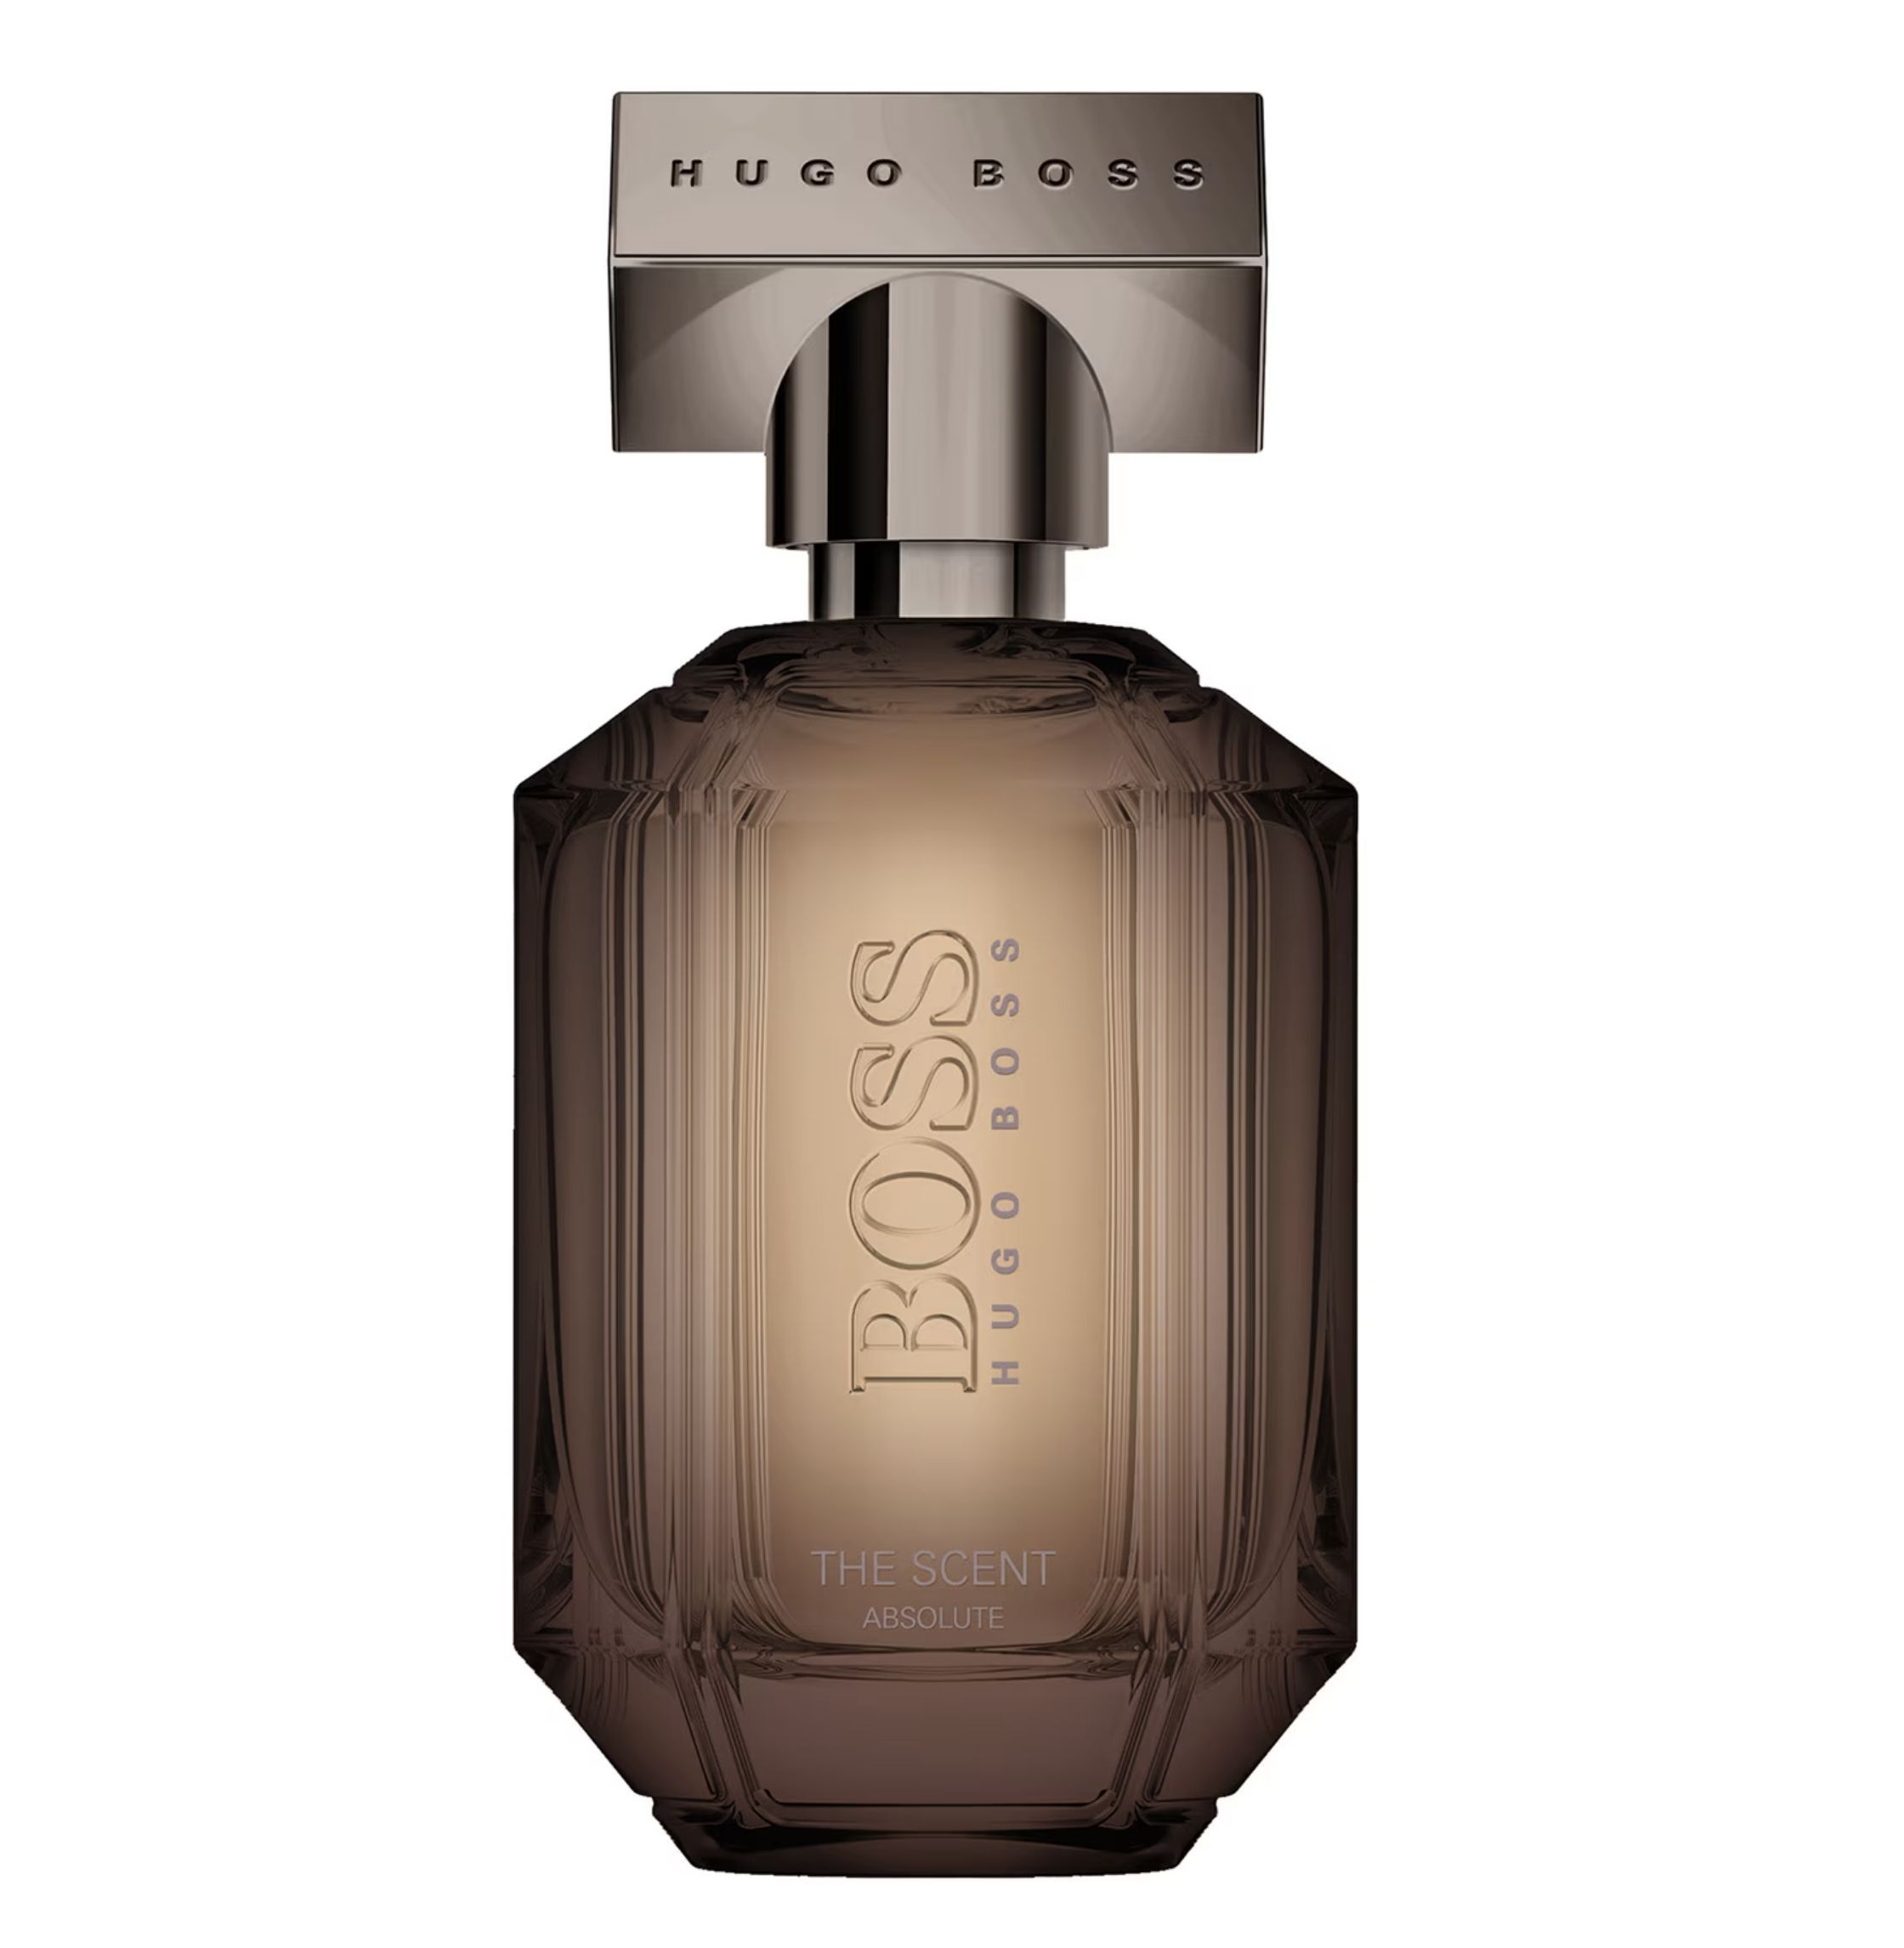 Хуго босс сент. Boss the Scent for her Hugo Boss. The Scent Hugo Boss женские. Hugo Boss the Scent for her Eau de Parfum. Boss Hugo Boss the Scent духи женские.